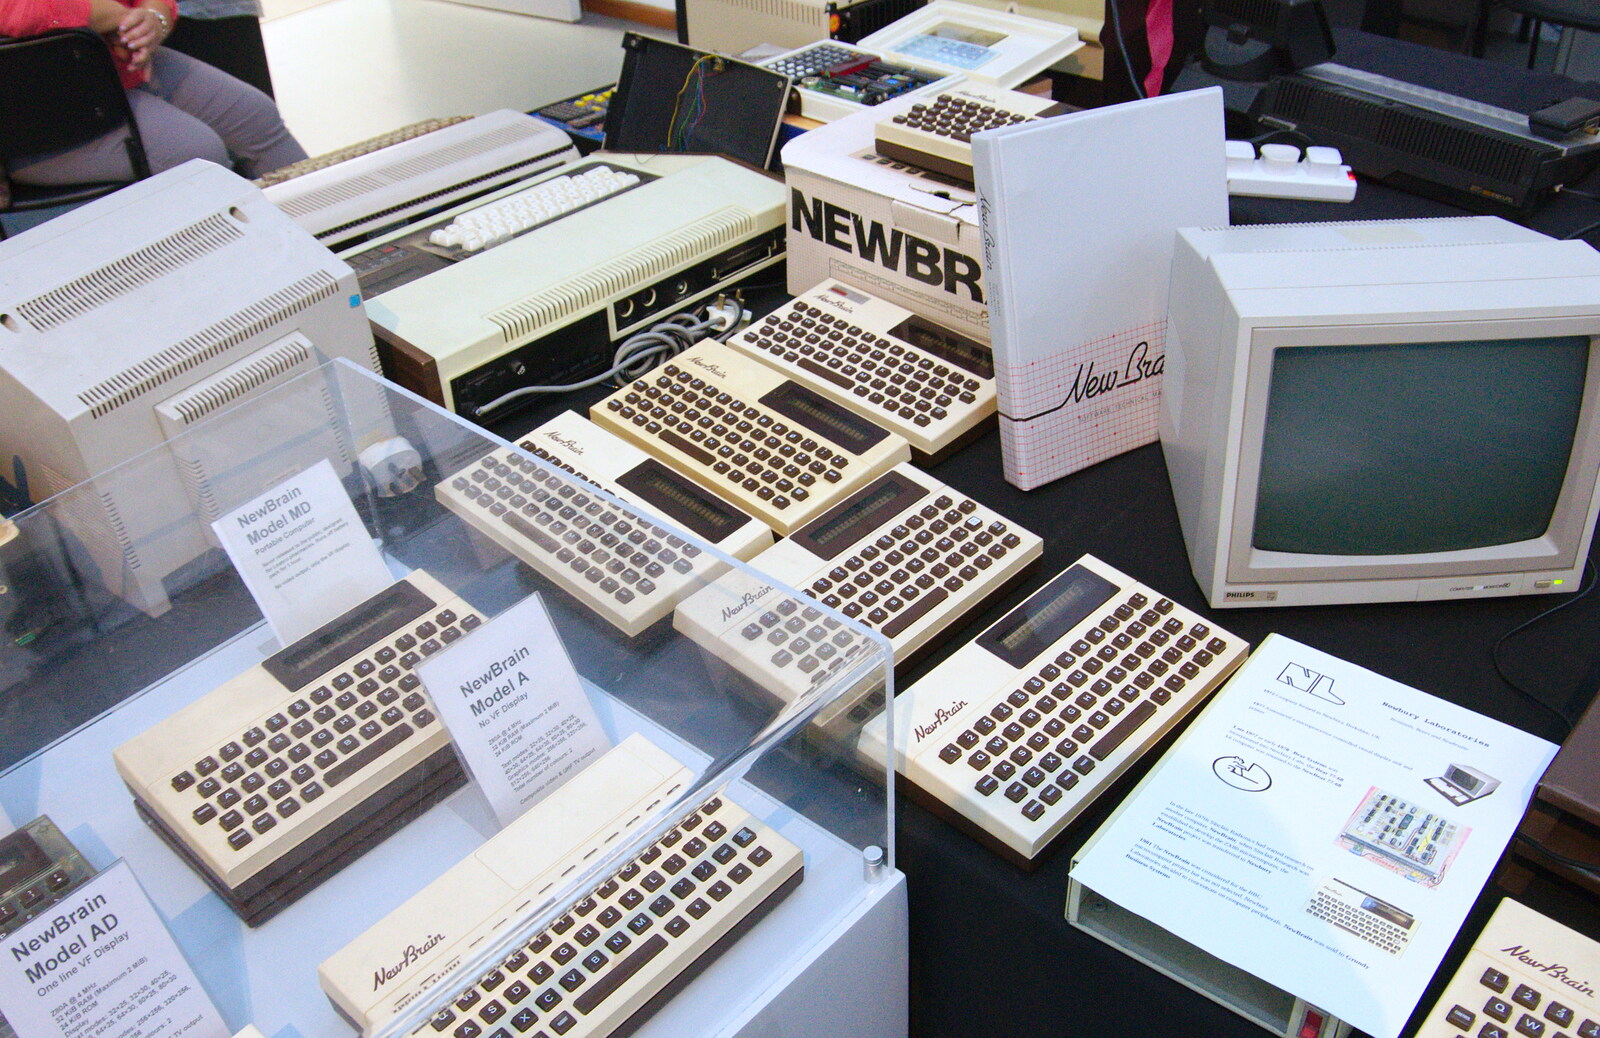 Possibly the UK's largest collection of NewBrains from The Retro Computer Festival, Centre For Computing History, Cambridge - 15th September 2018